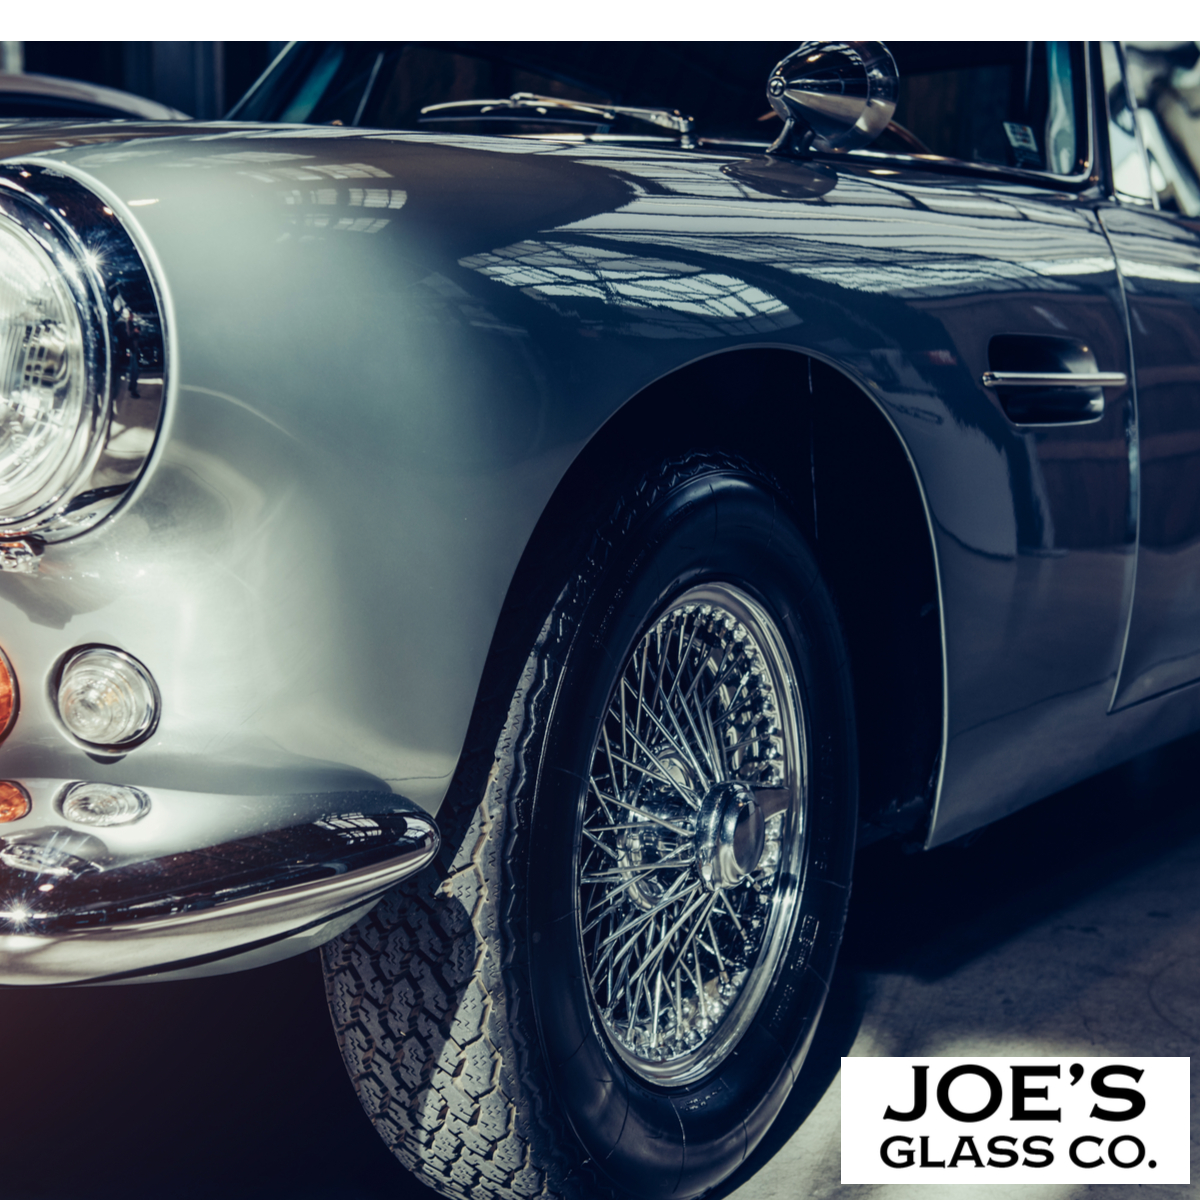 Call Us for Windshield Replacement for Your Classic Car Project!